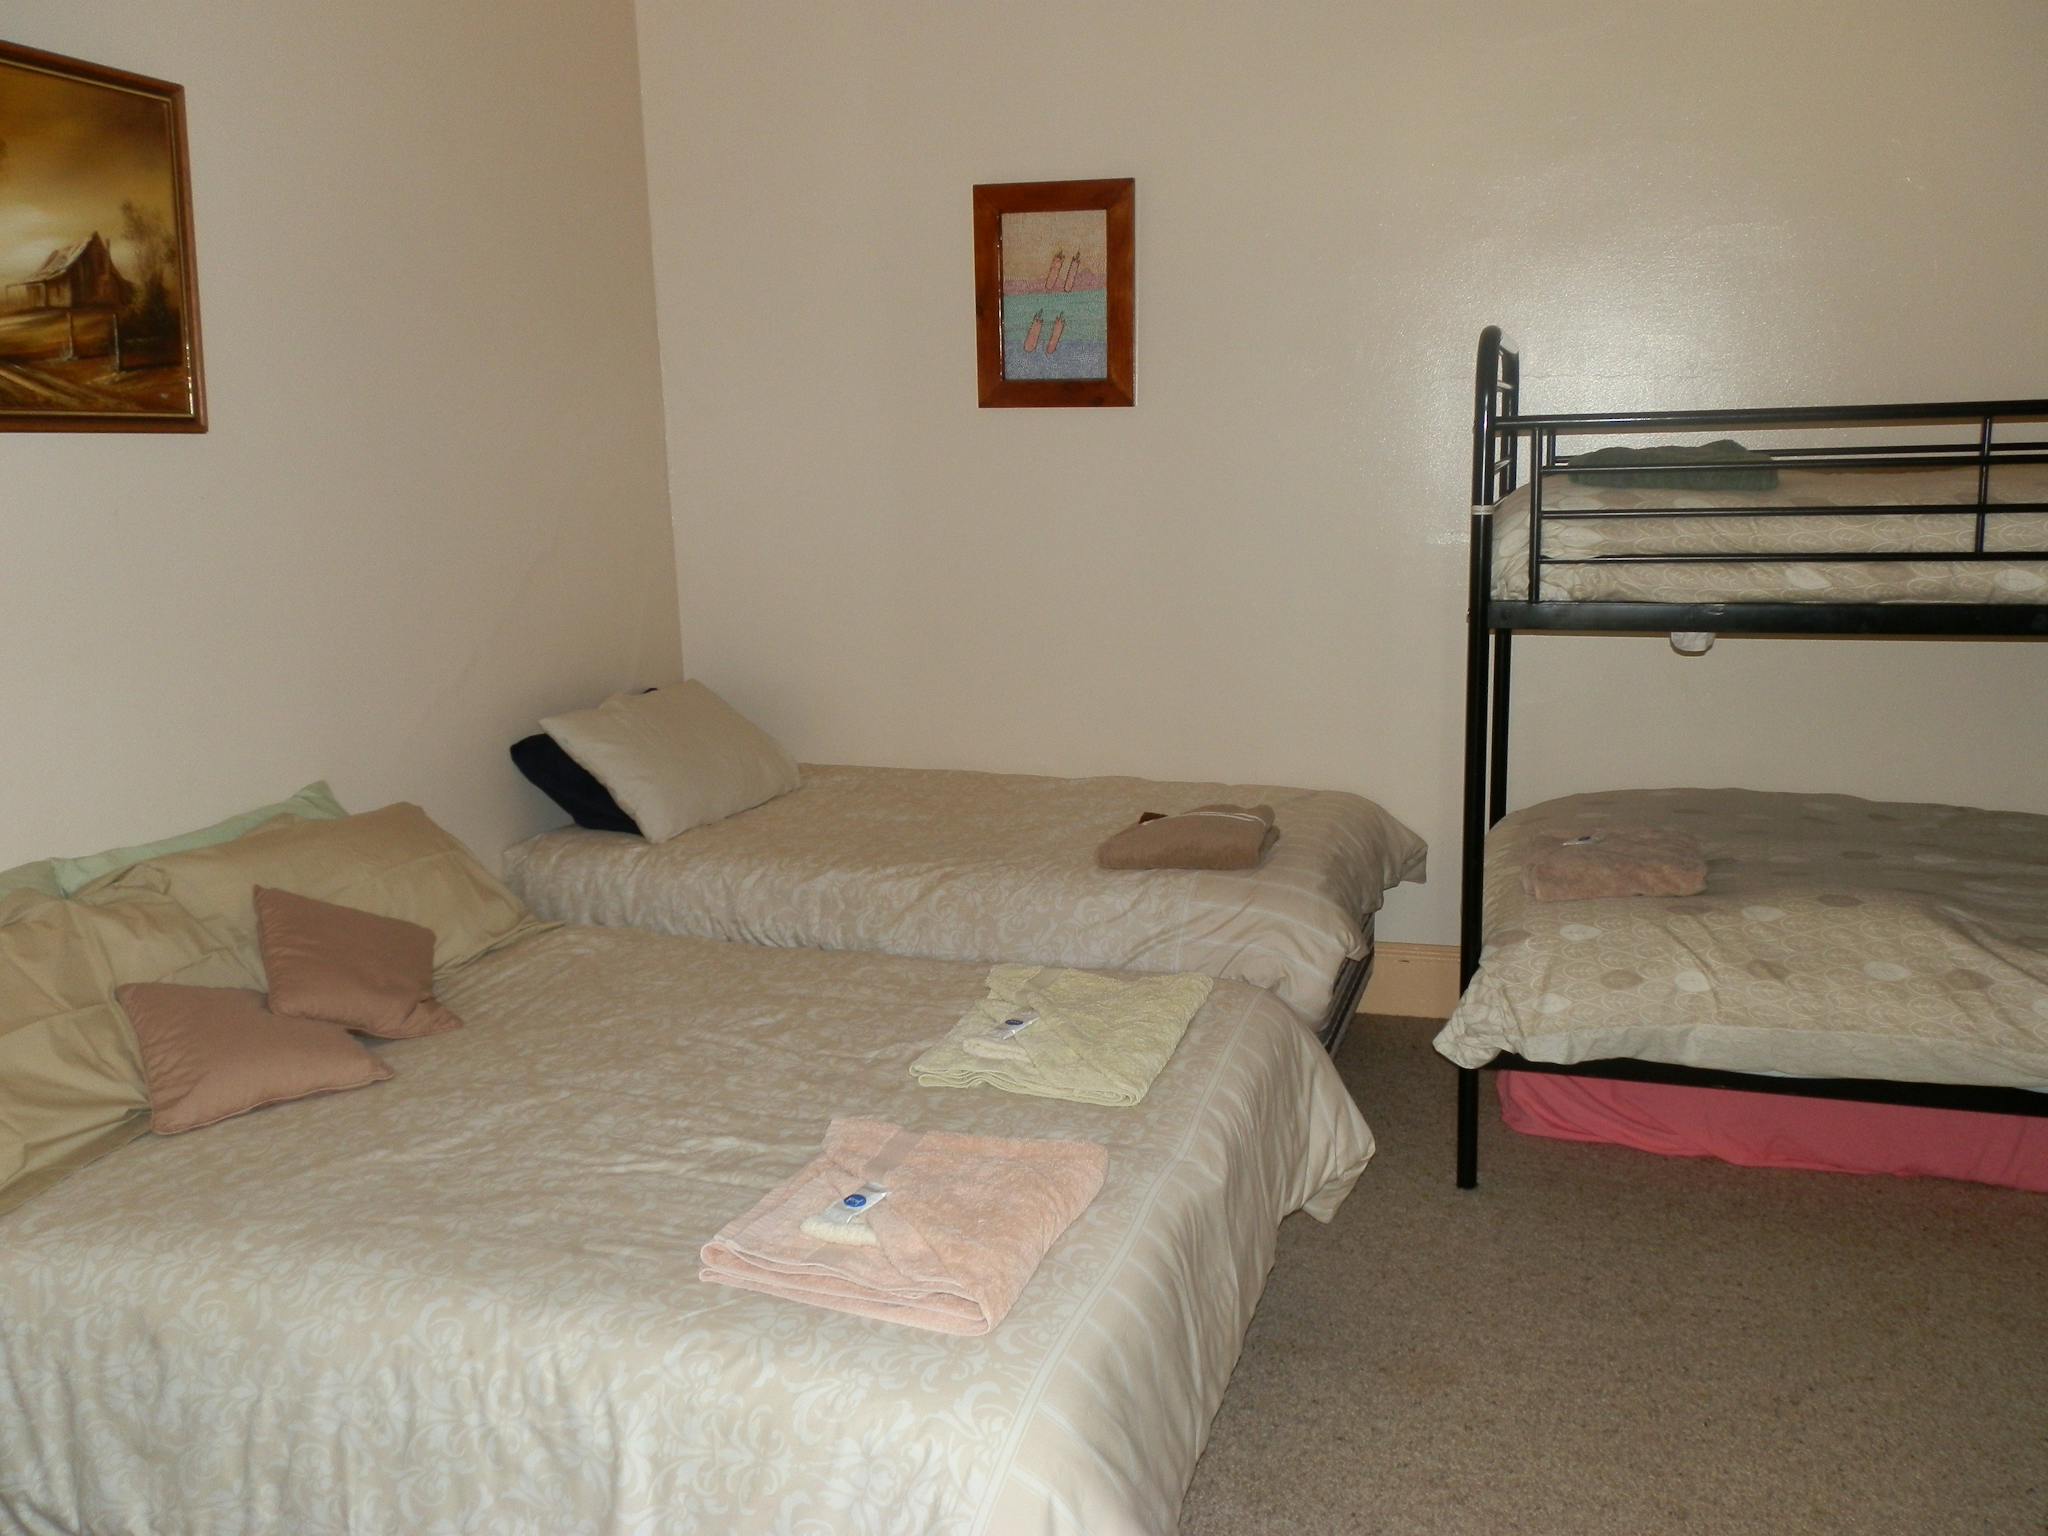 Henty Bed and Breakfast